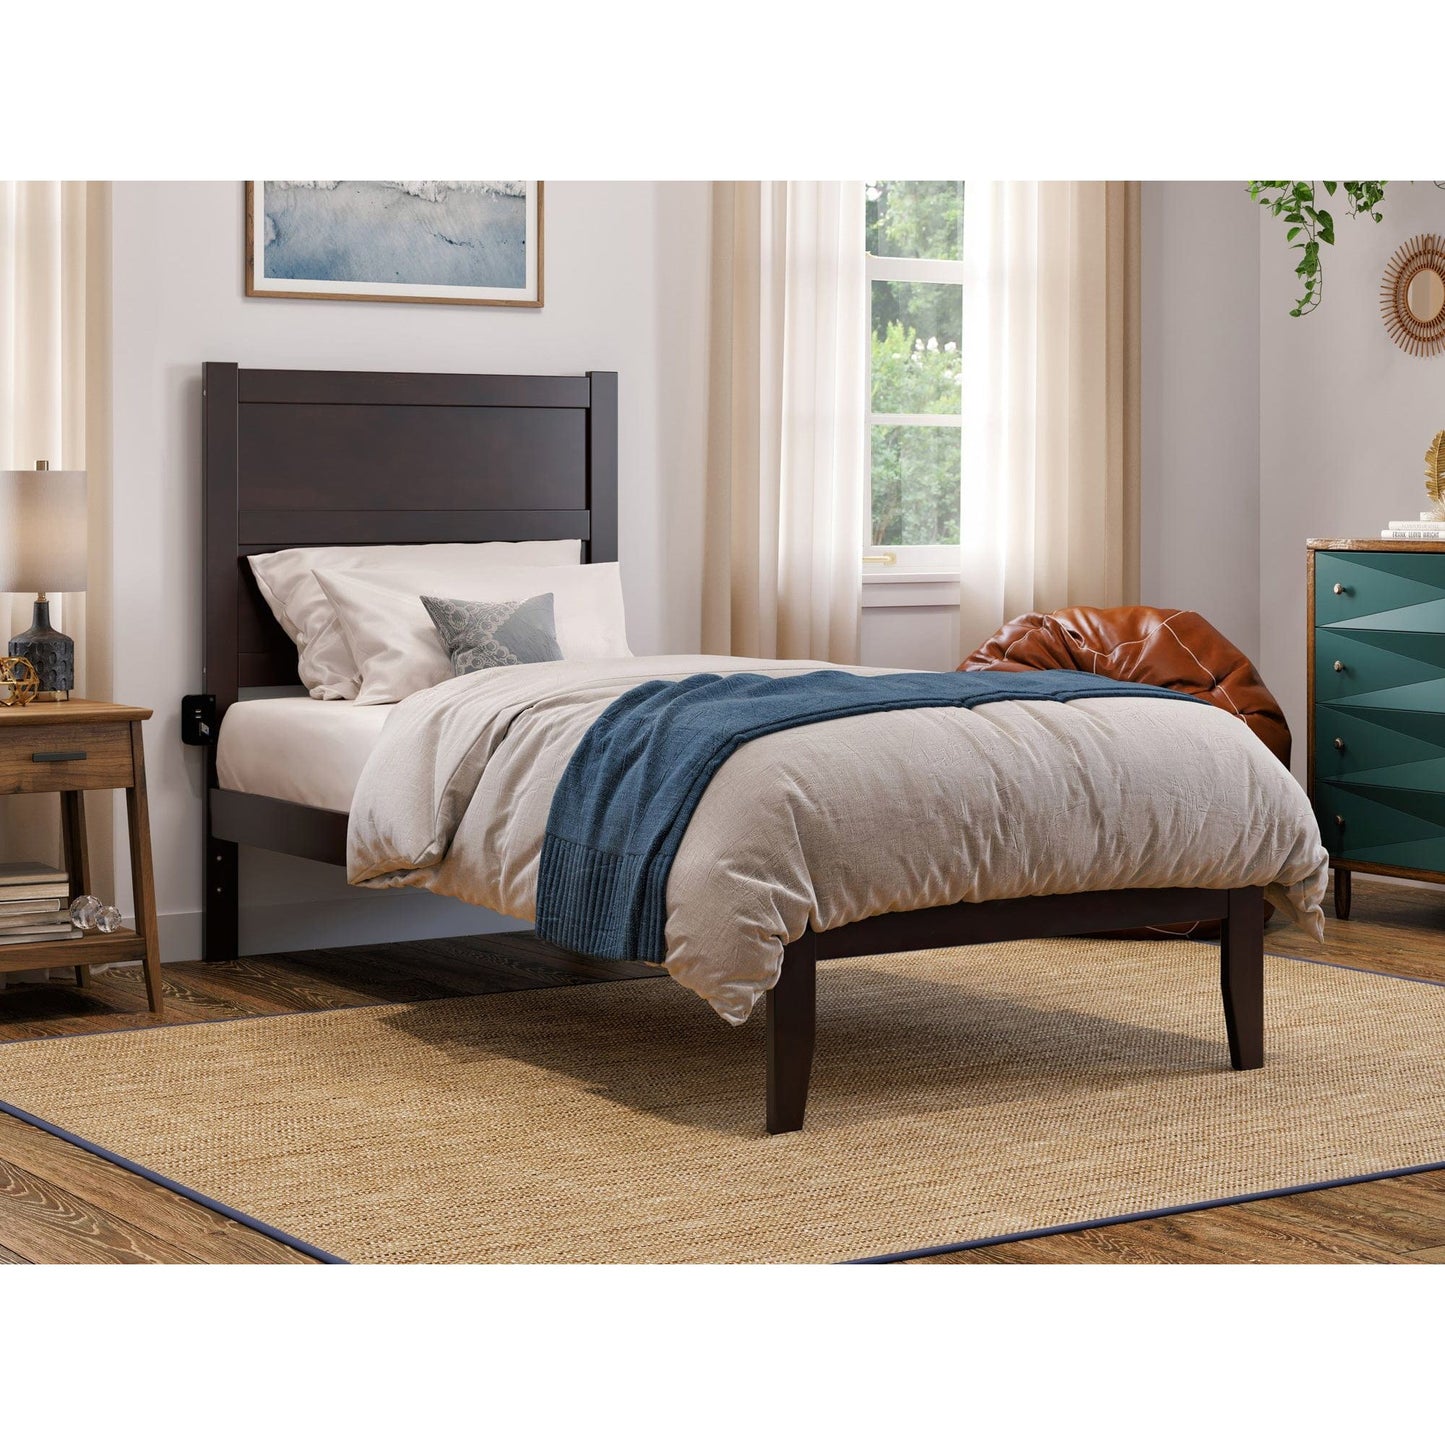 AFI Furnishings NoHo Twin Extra Long Bed in Espresso AG9110011